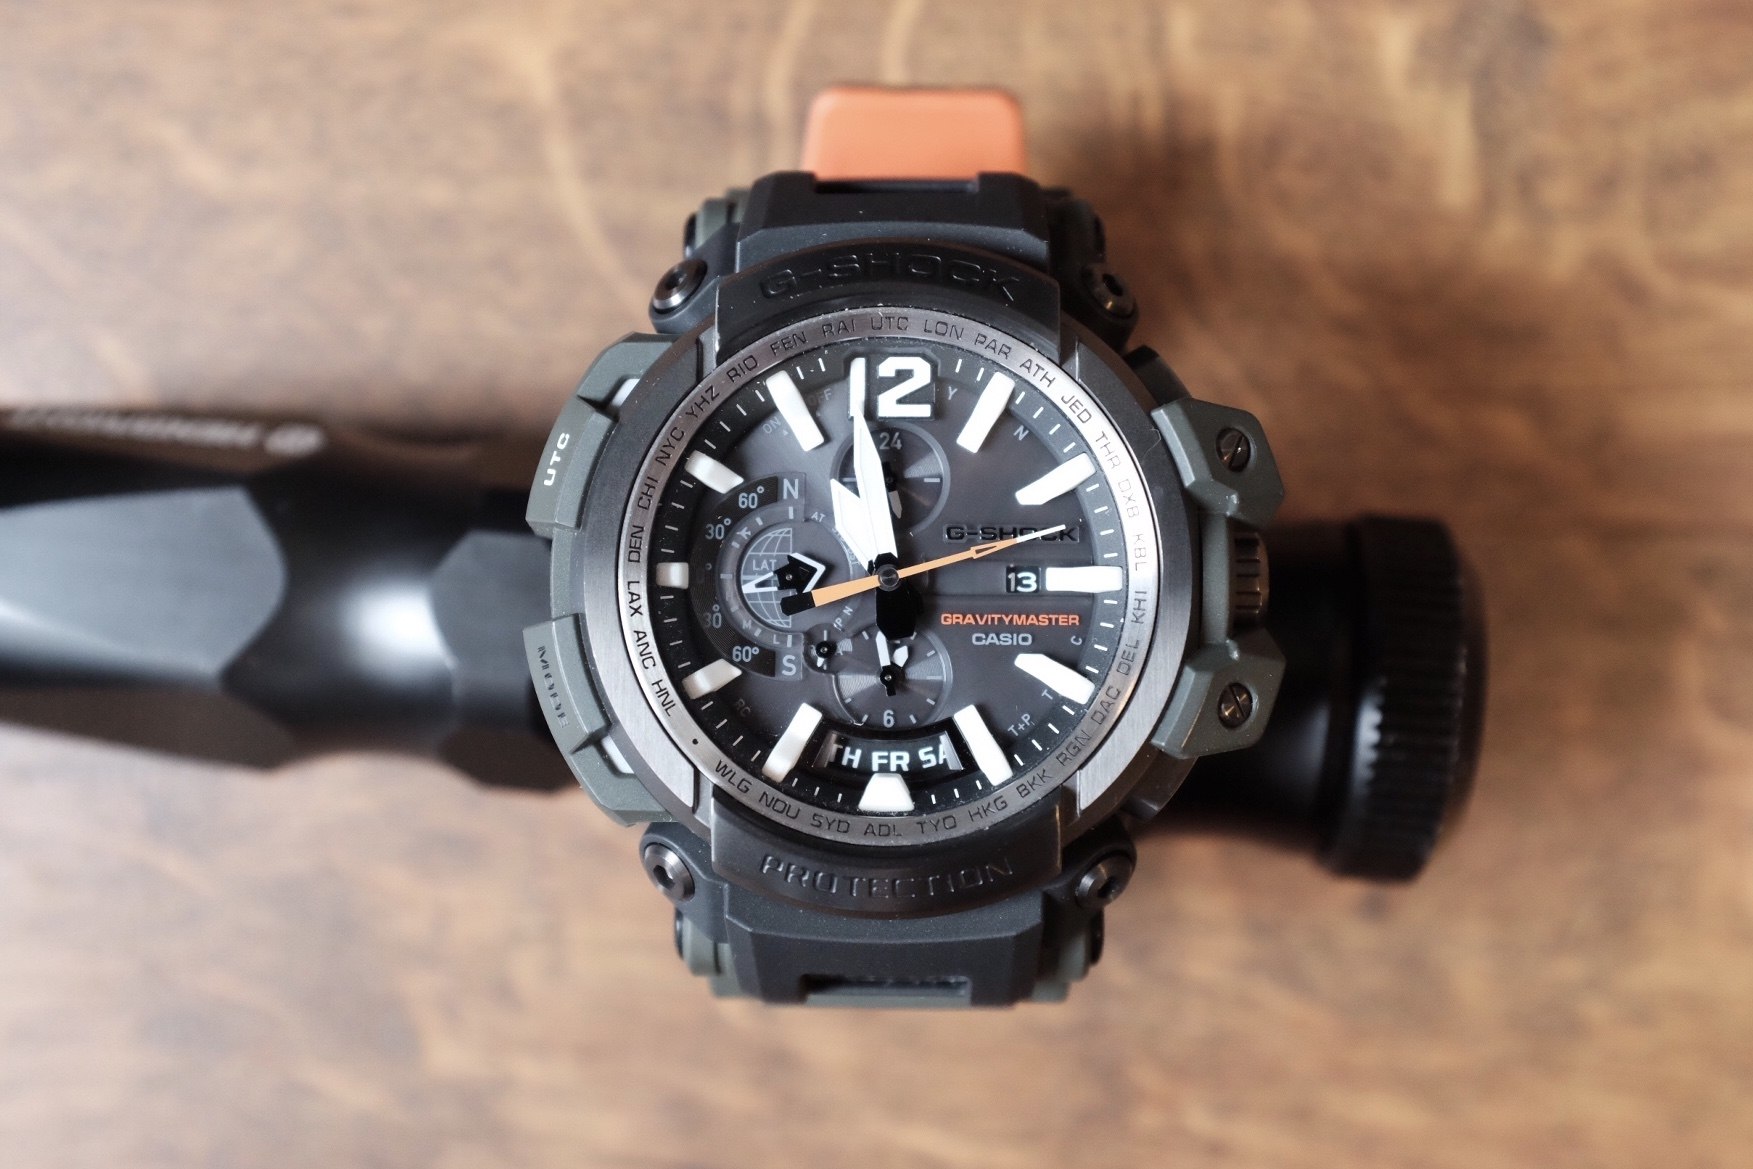 Casio G-SHOCK GPW-2000 'Gravitymaster' – The Brooks Review